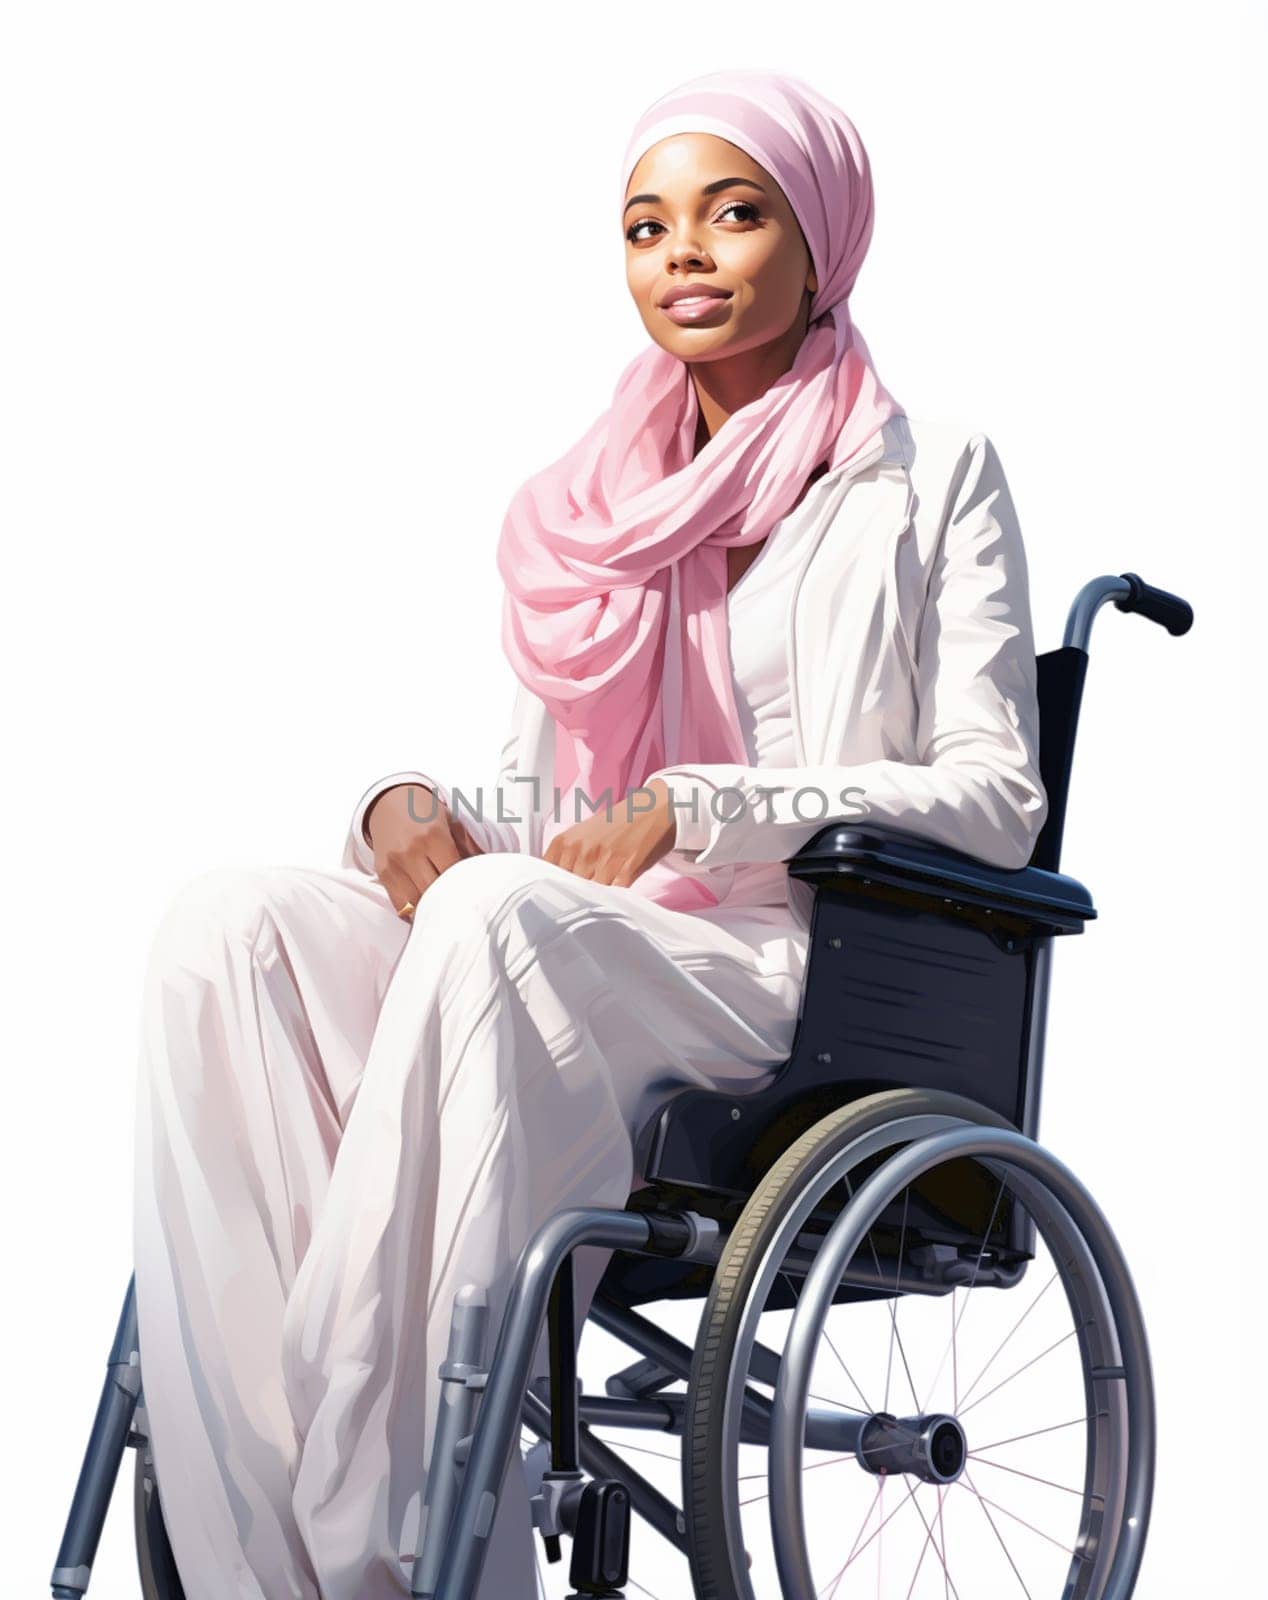 Female Muslim patient in a wheelchair, she was happy and relaxed in the hospital examination room. High quality photo